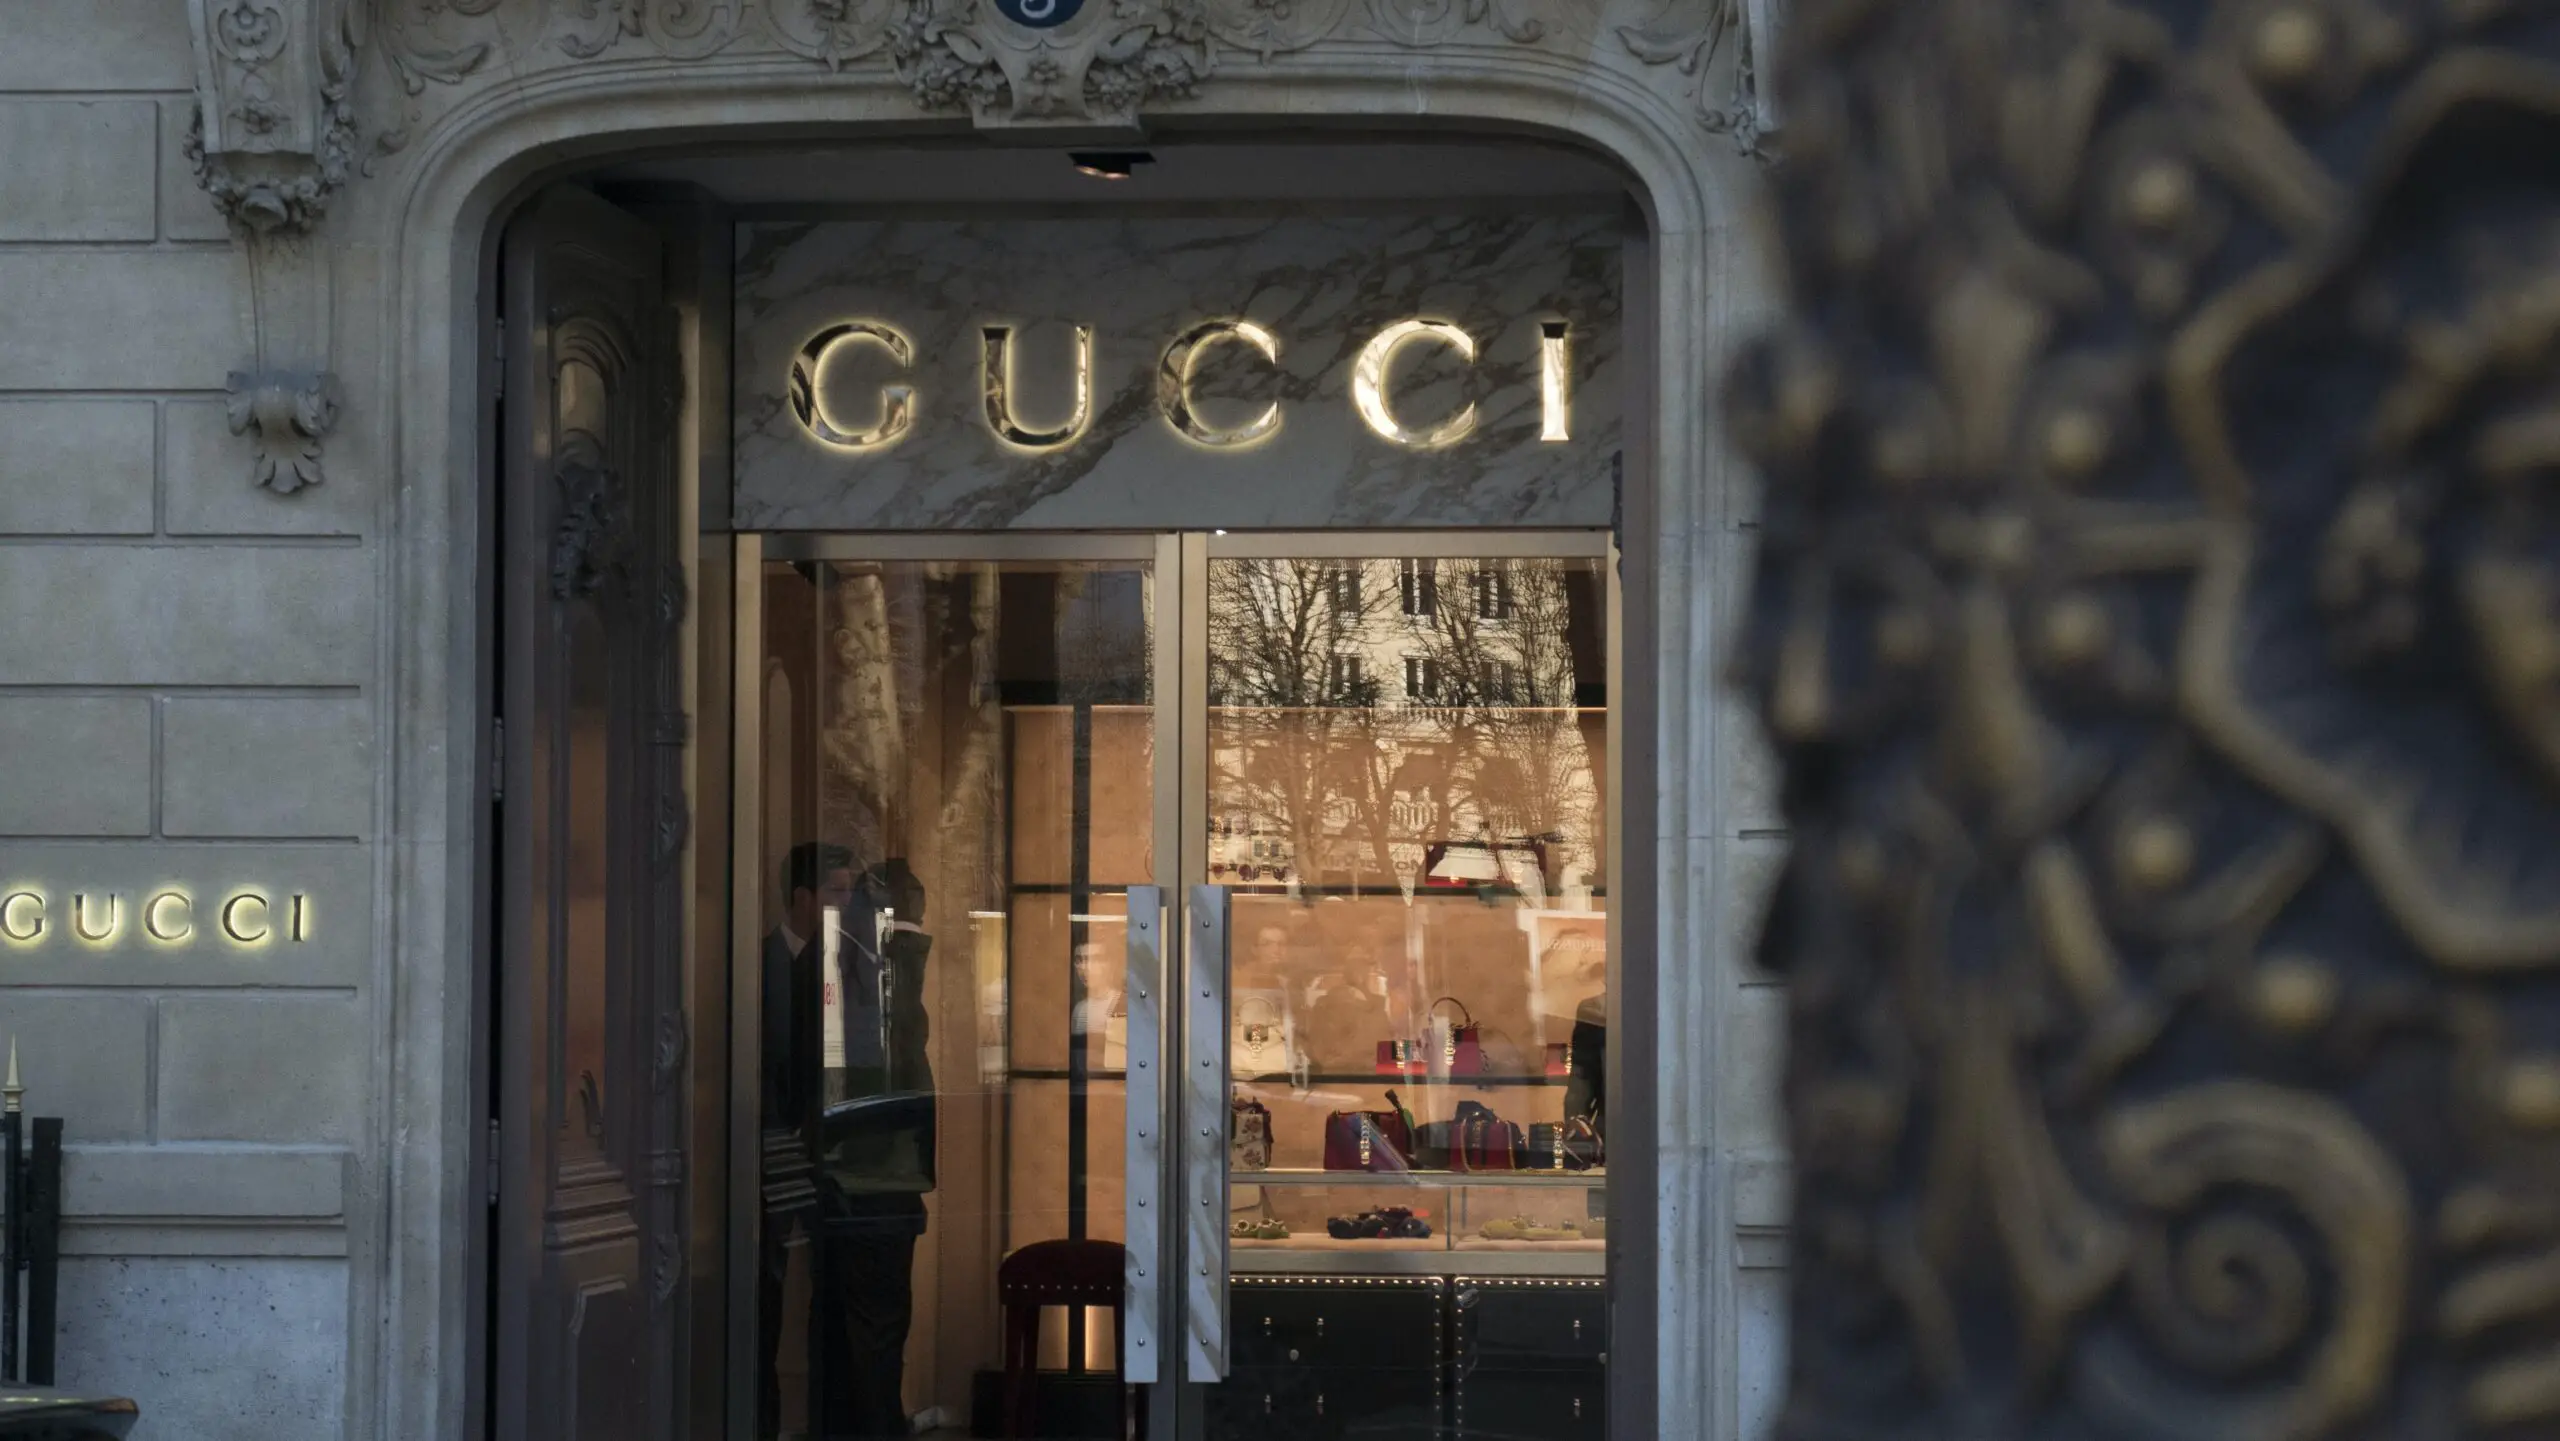 Quickly Find the Serial Number on Gucci Glasses – Check Here